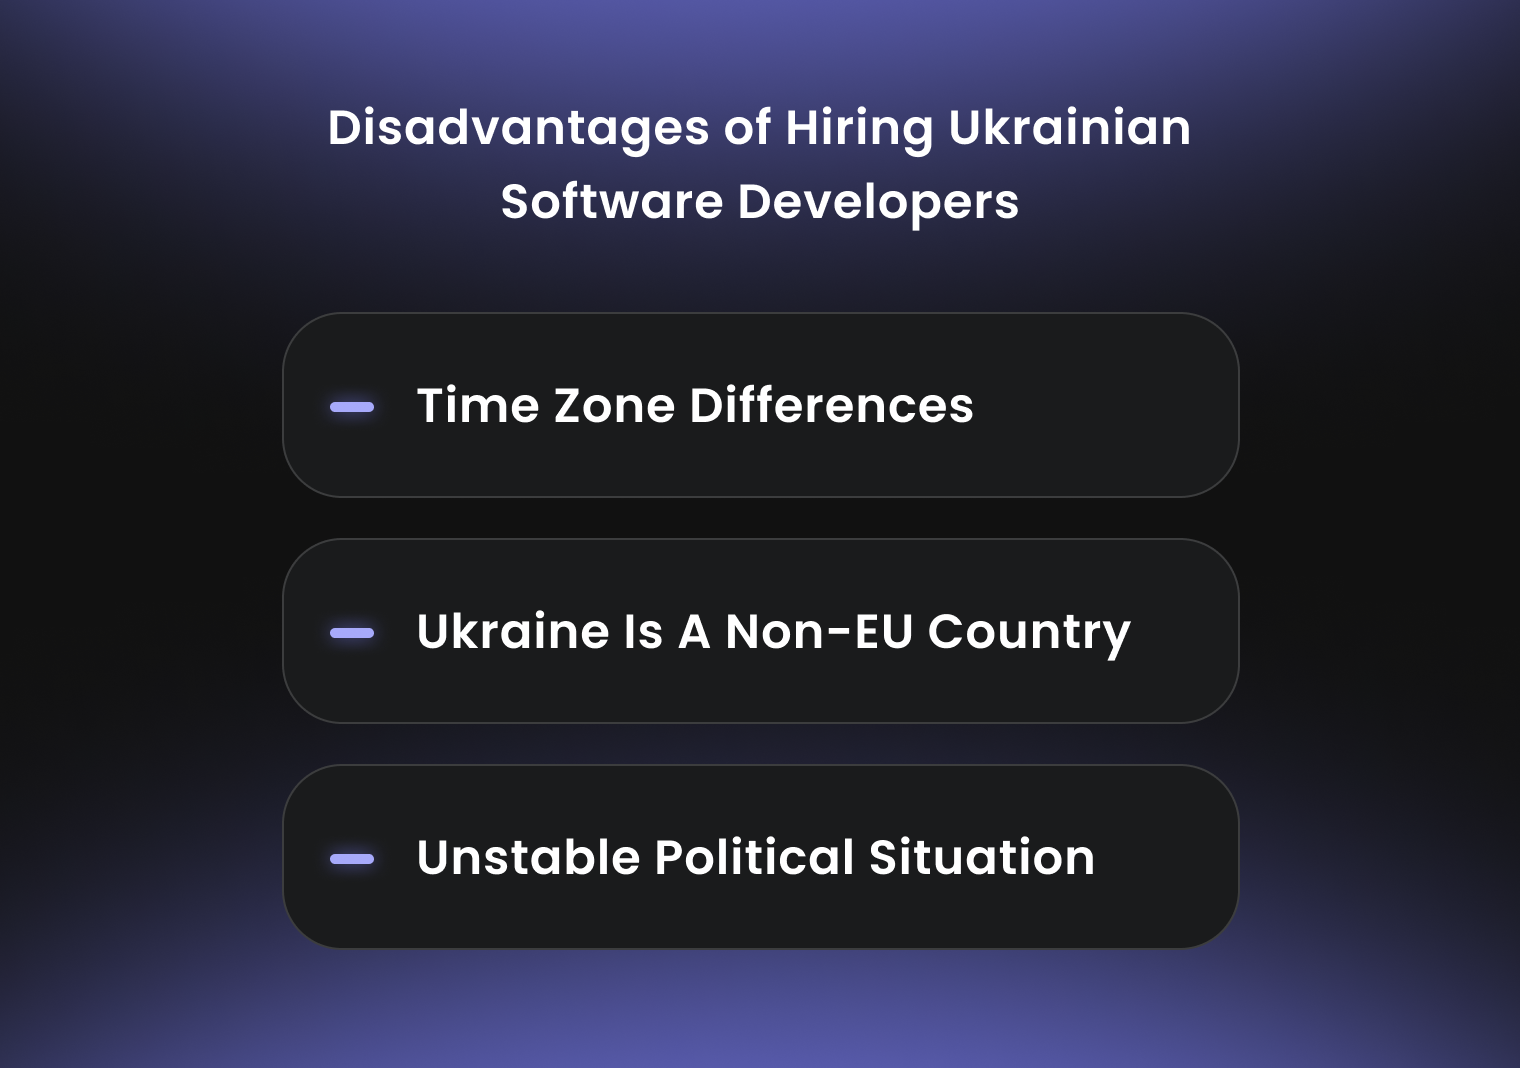 Hire Software Developers in Ukraine: Key Reasons and How to Do It? - 4